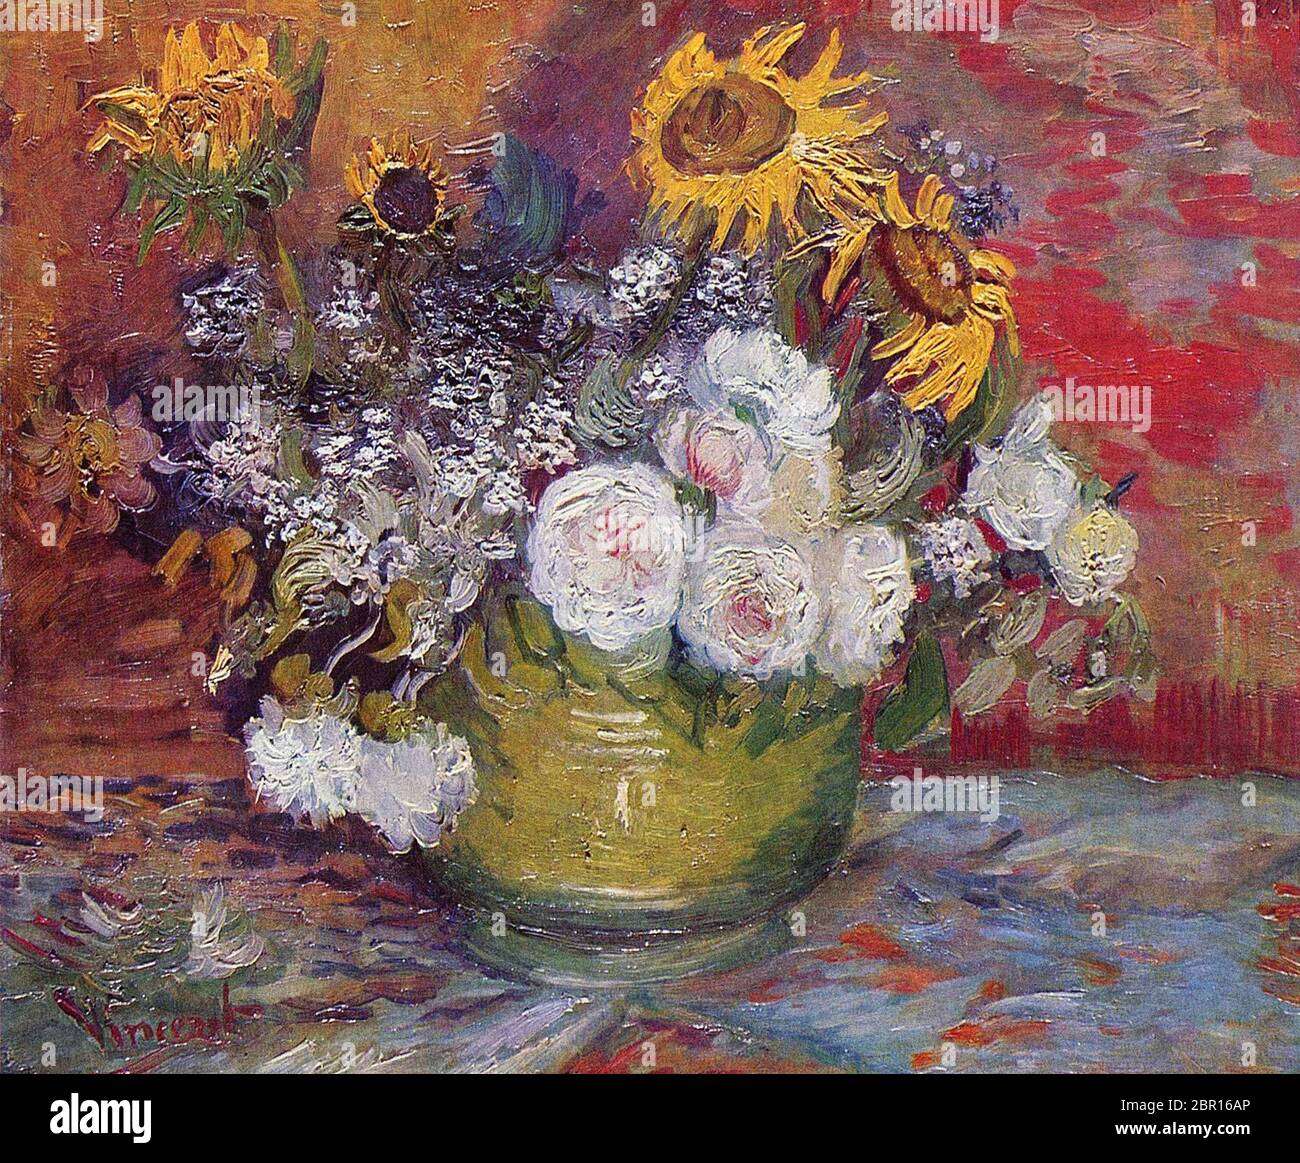 Roses And Sunflowers By Vincent Van Gogh 16 The Kunsthalle Mannheim In Mannheim Germany Stock Photo Alamy